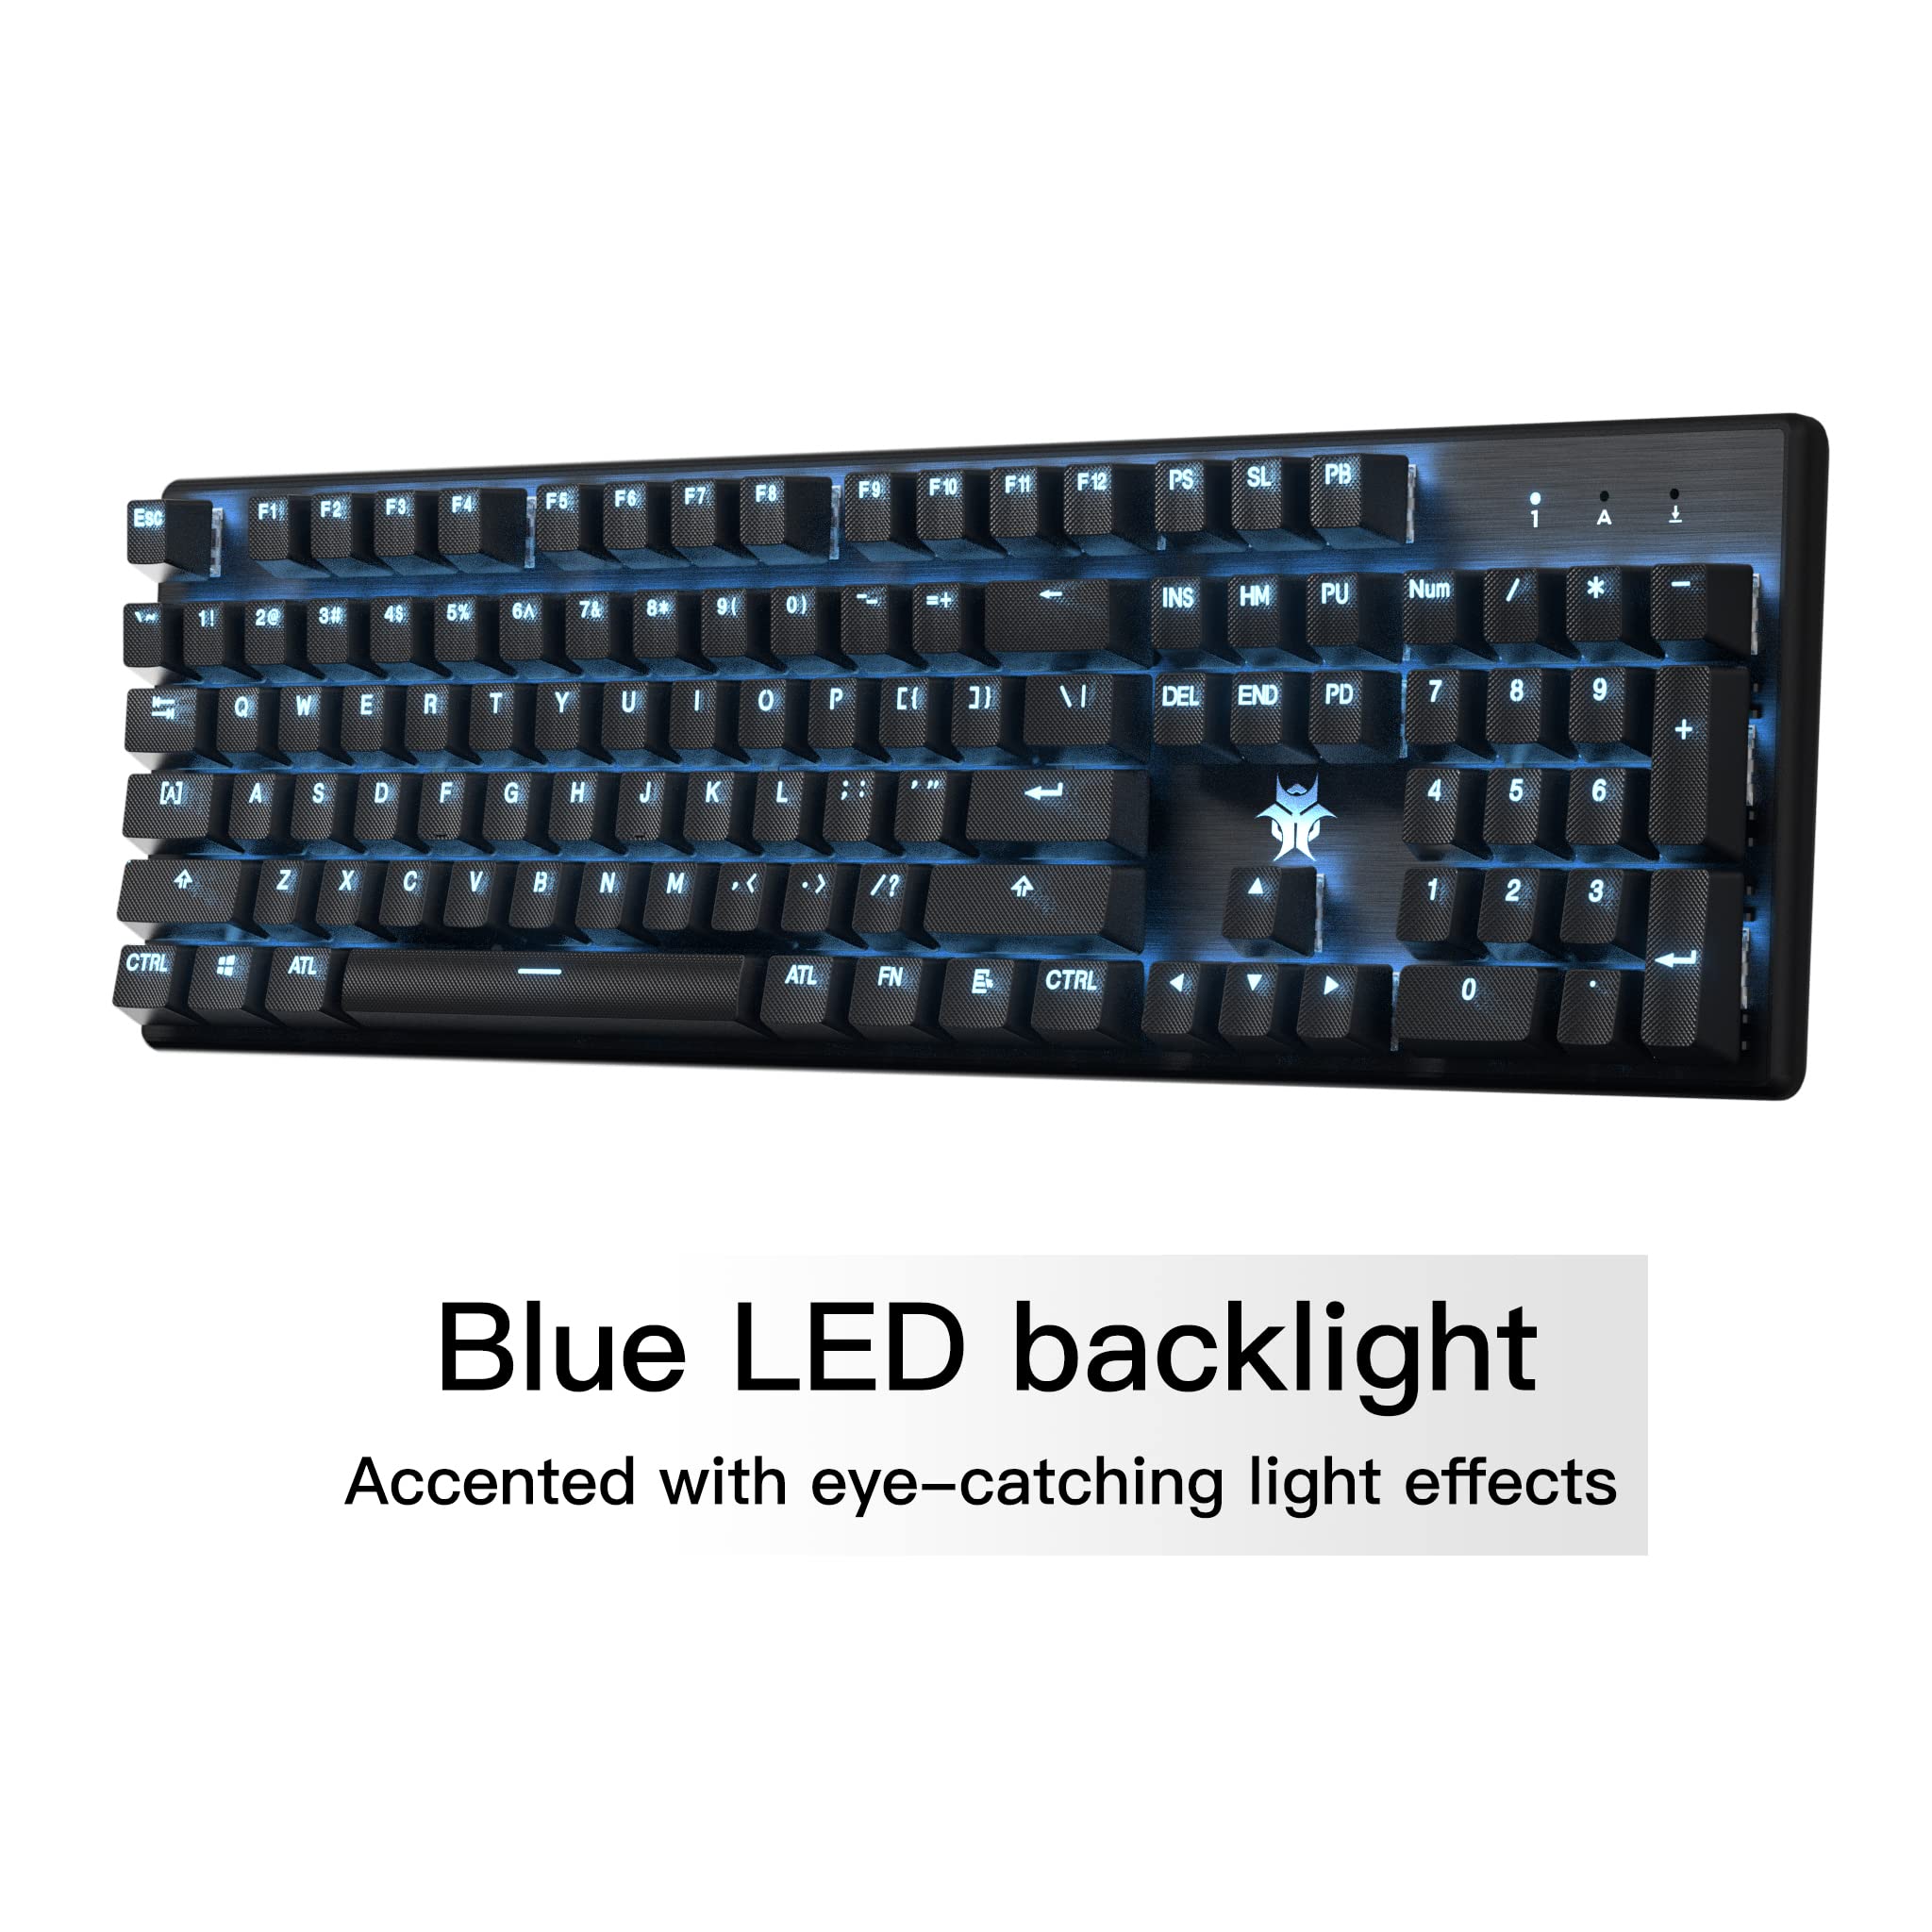 Mua Hexgears G5 2.4G Wireless Mechanical Keyboard 104 Key， Wireless and Type -C Wired Connection, 100% Full-Size, Blue LED Backlit, Windows and Mac OS  Compatible Black Keyboard Kailh Box Brown Switches trên Amazon